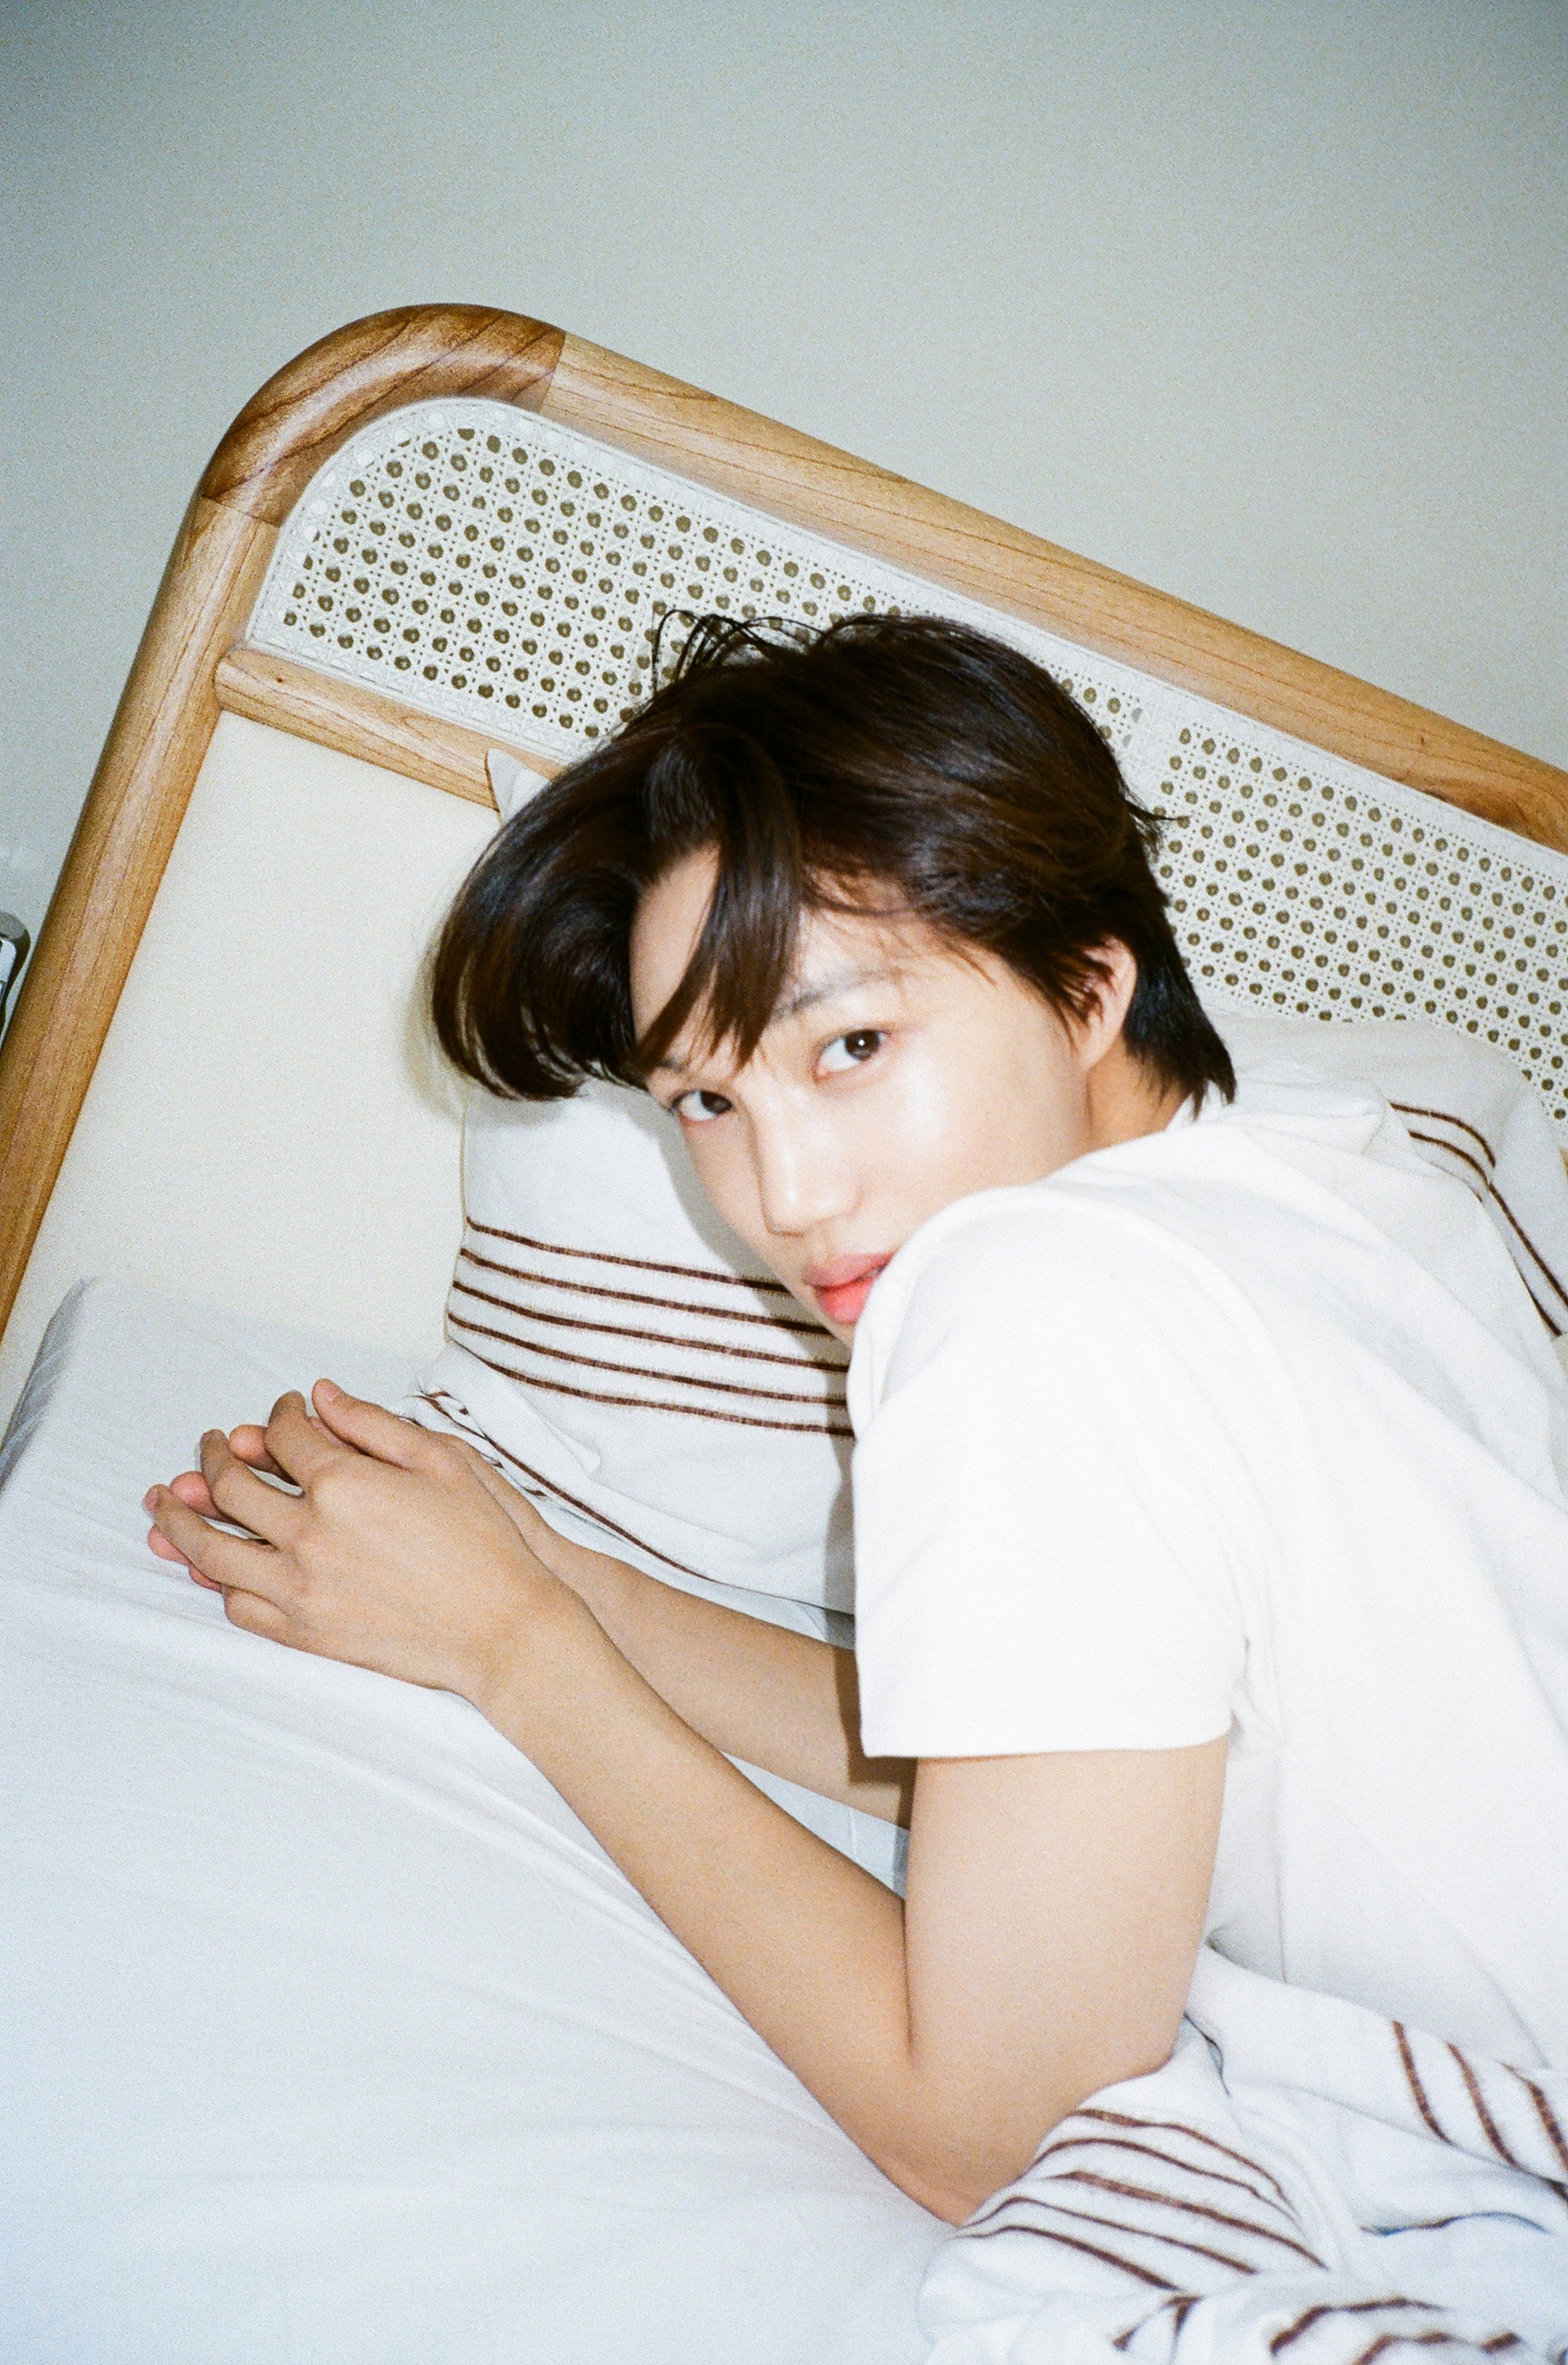 A Coquettish Kai Owns His Sexiness in “Peaches” – Seoulbeats